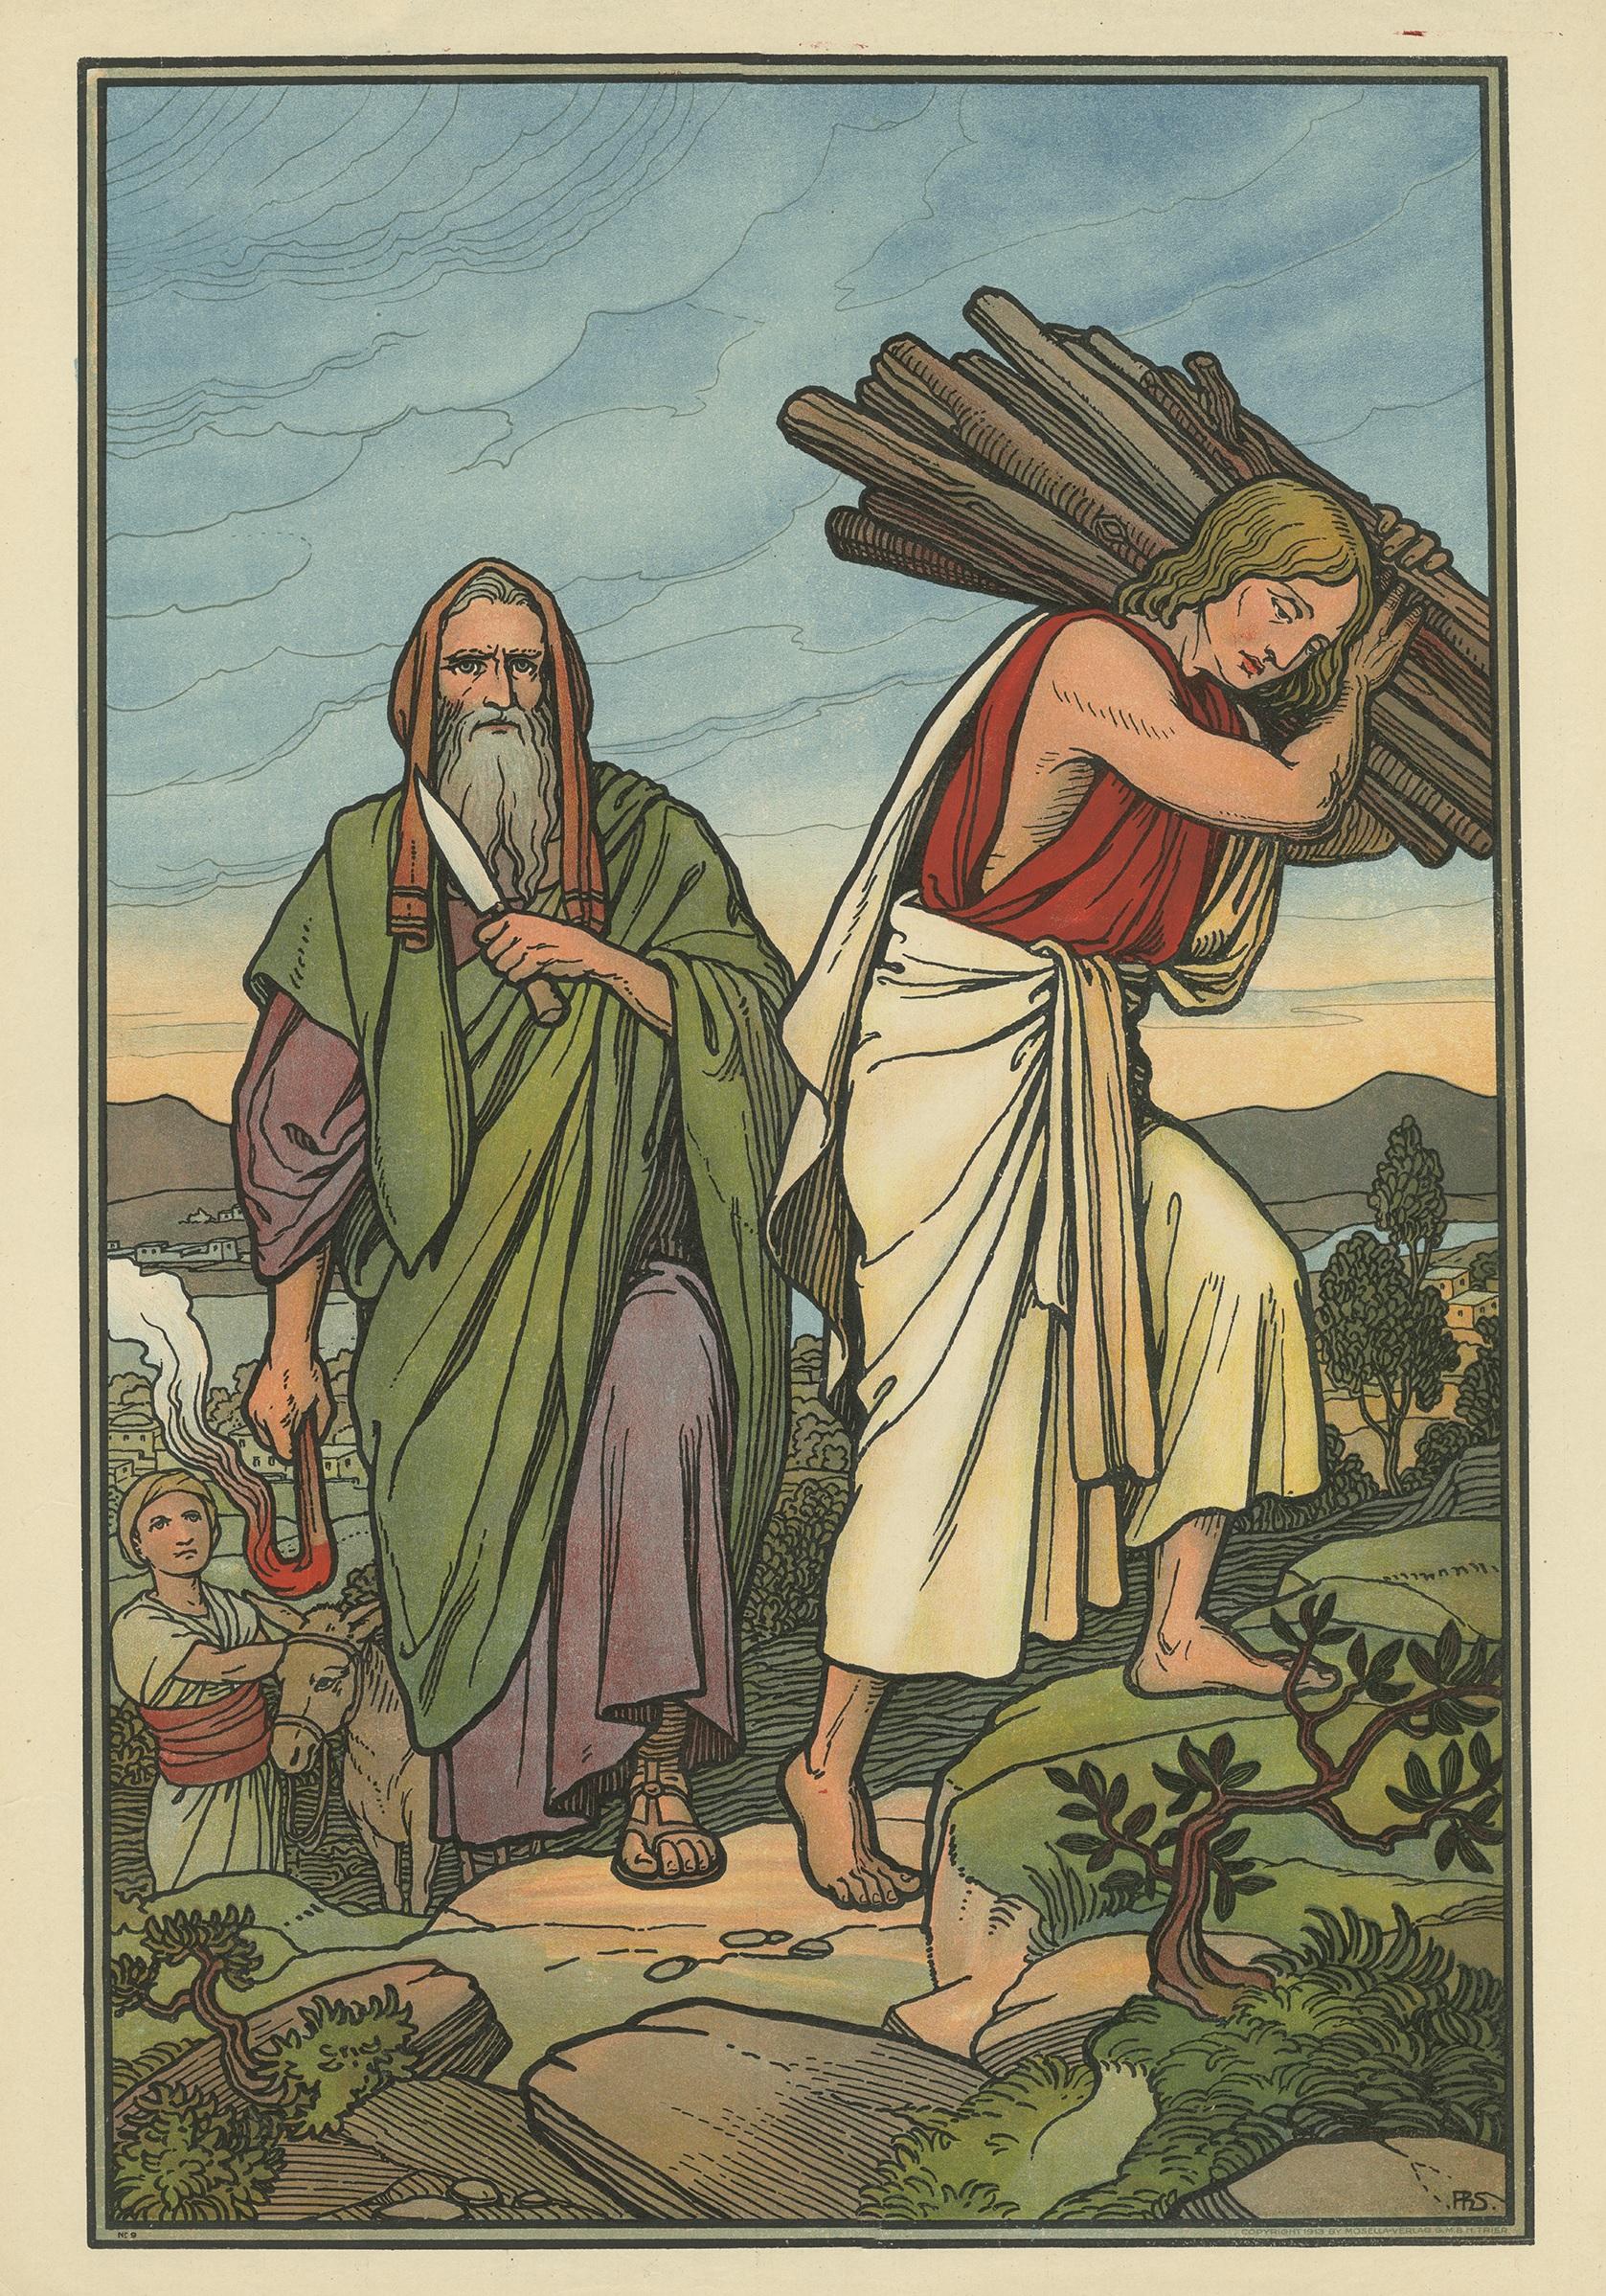 Large antique print of the Sacrifice of Isaac. Published by Mosella-Verlag, 1913. This print originates from a series titled 'Kathol. Schulbibelwerk von Dr. Ecker'.